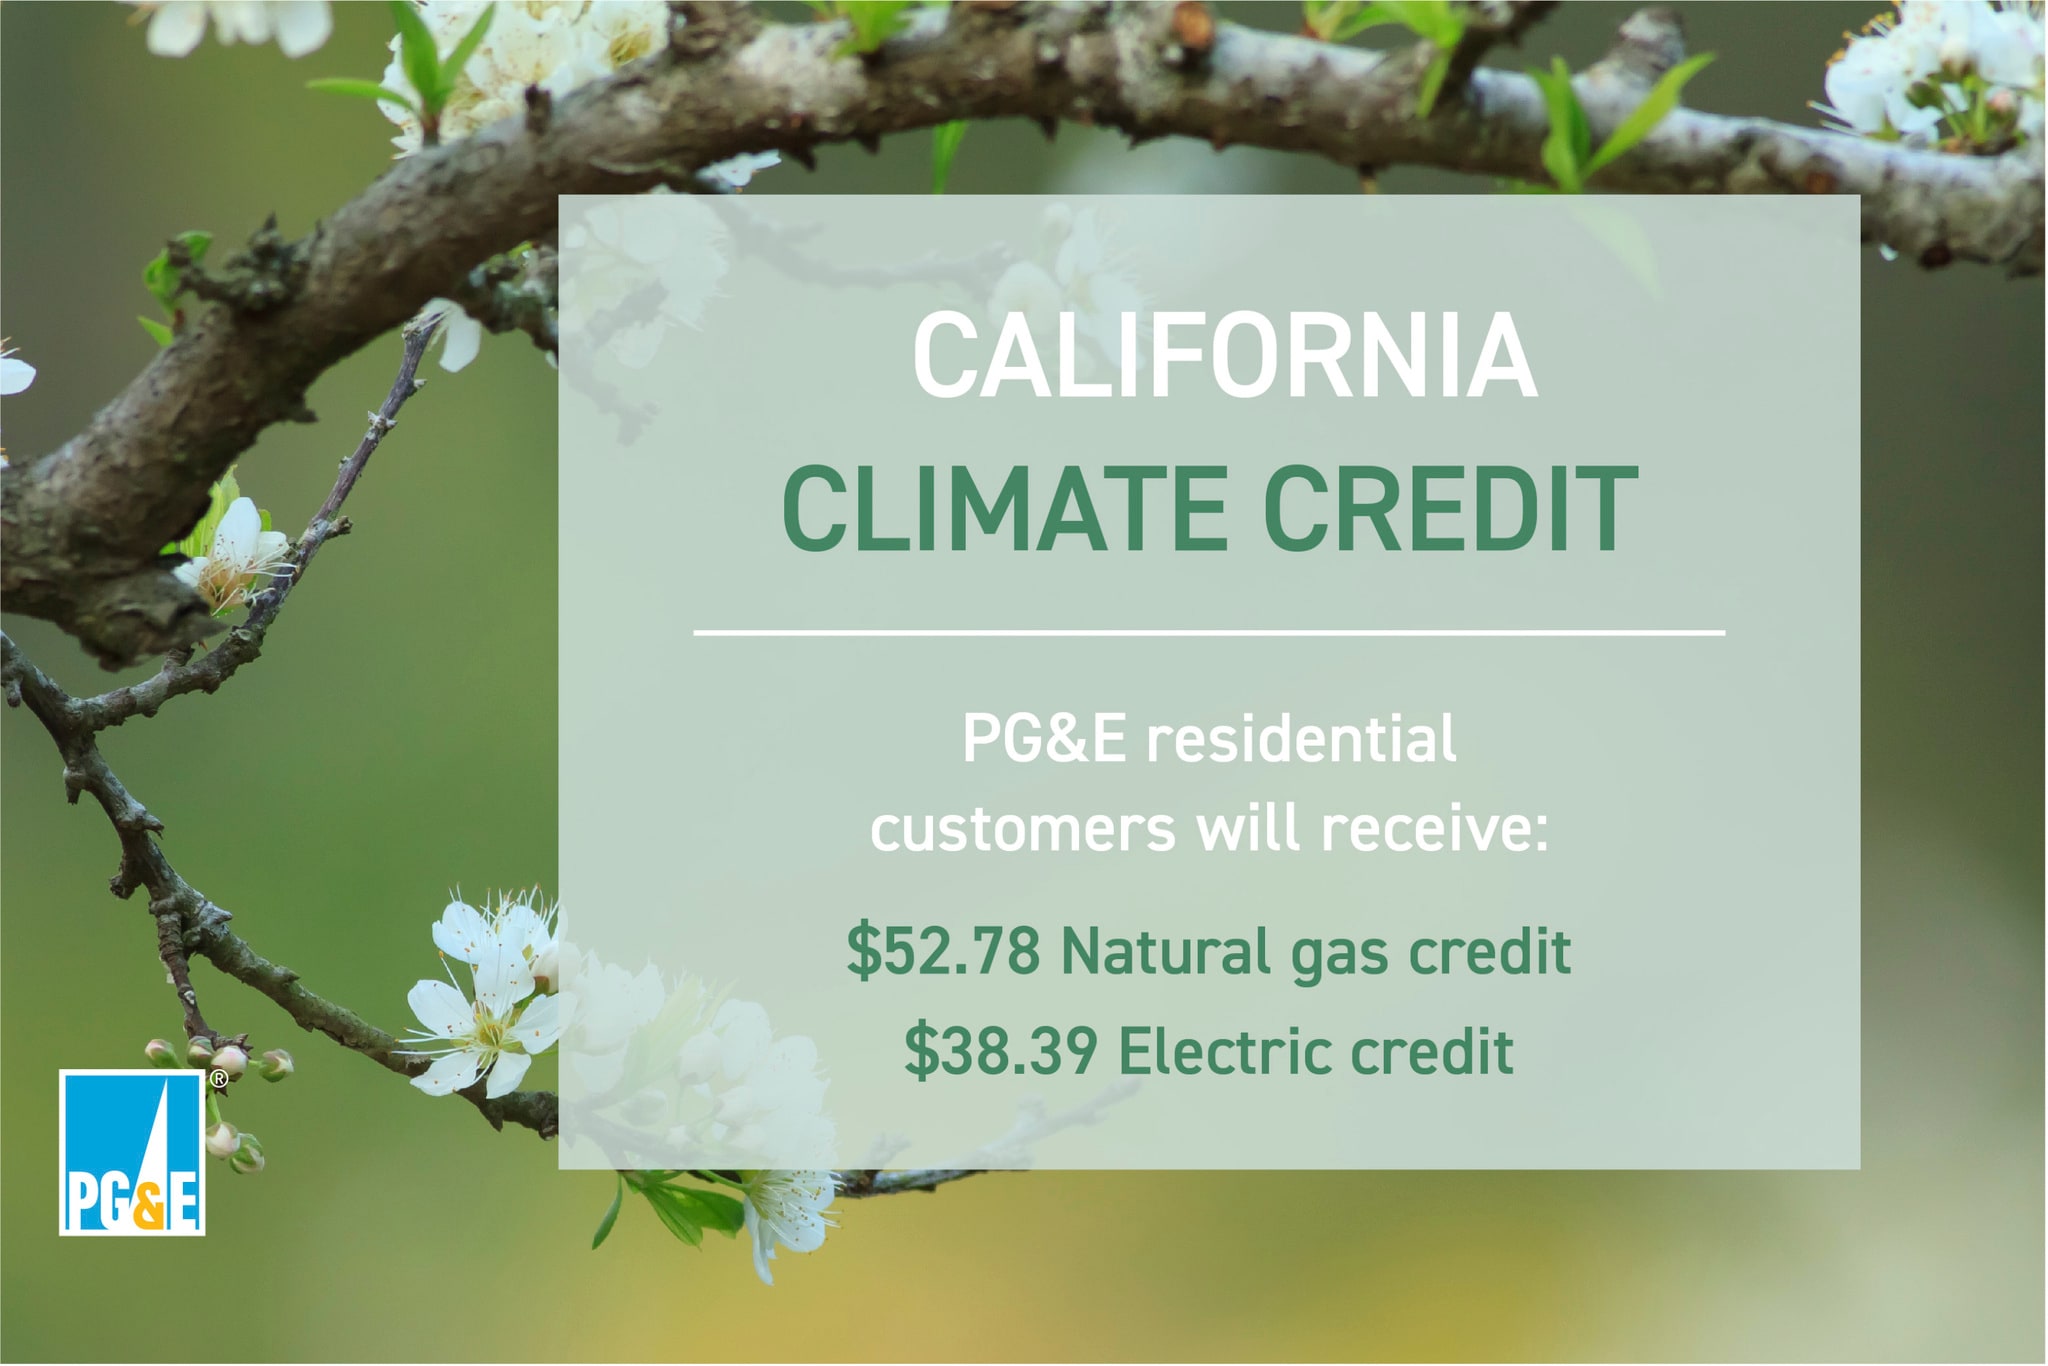 California Climate Credit Totaling Up to 91.17 to Help Customers with